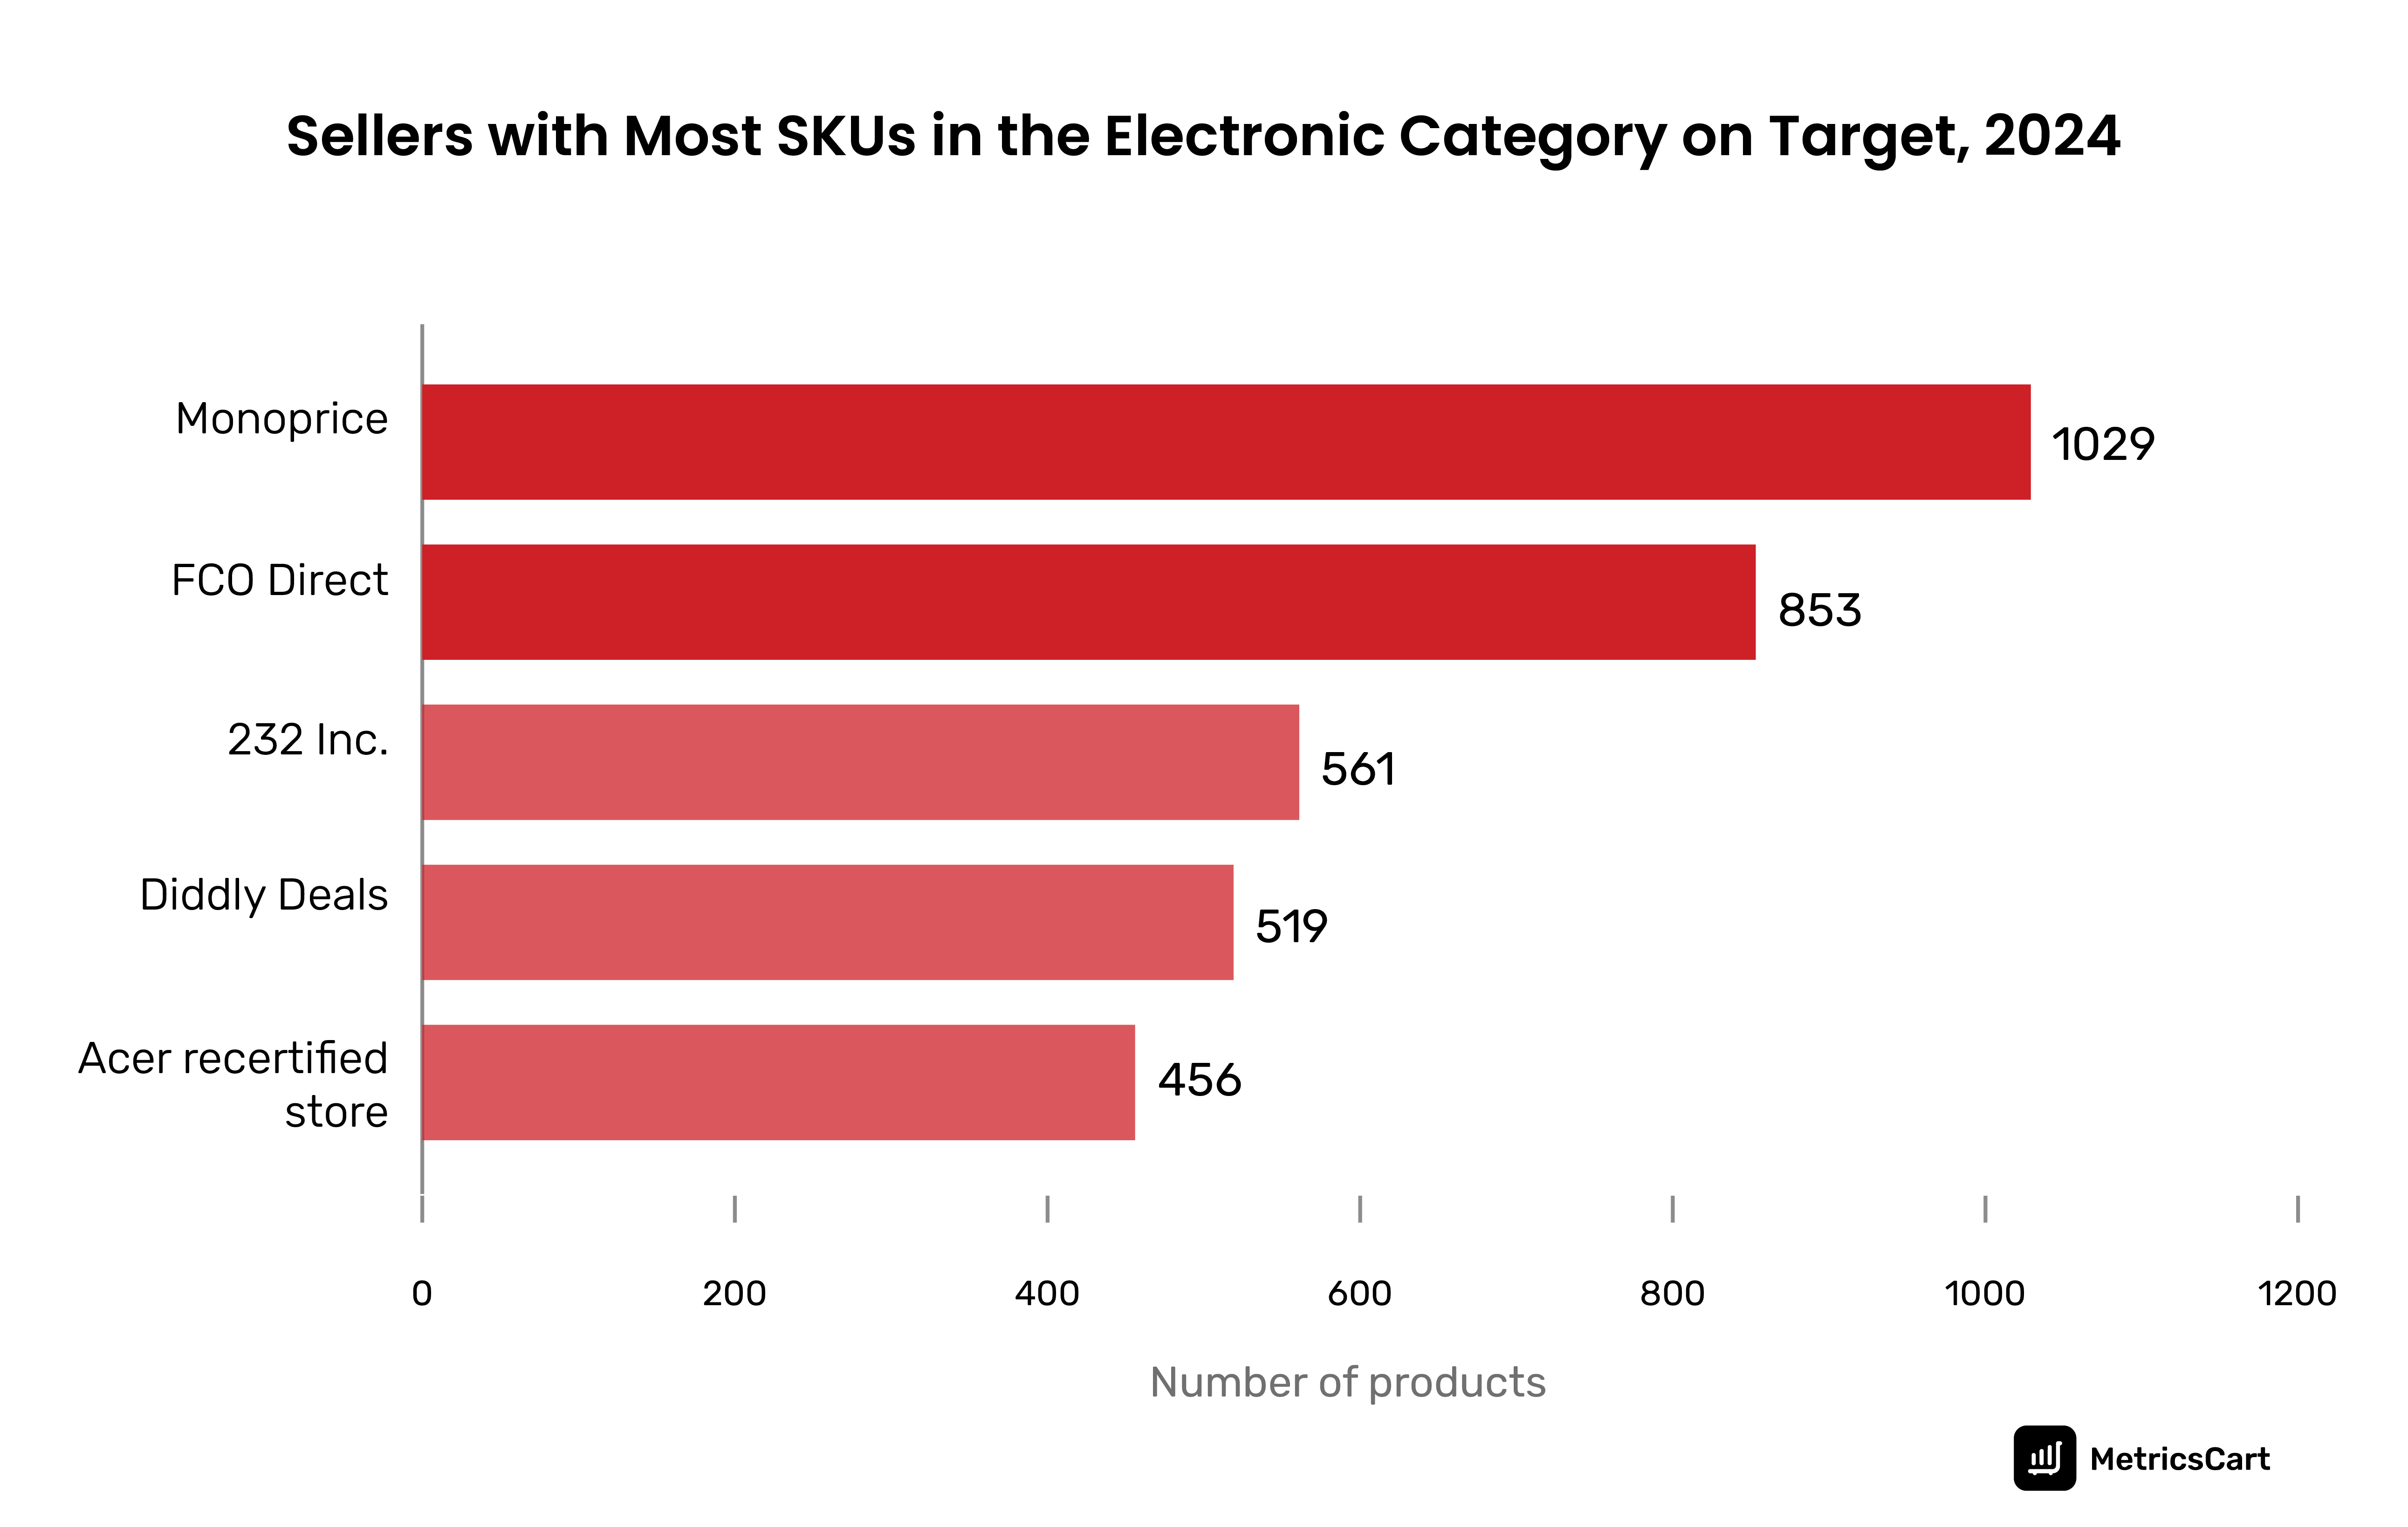 The graph shows sellers on Target with the most number of products to sell in 2024